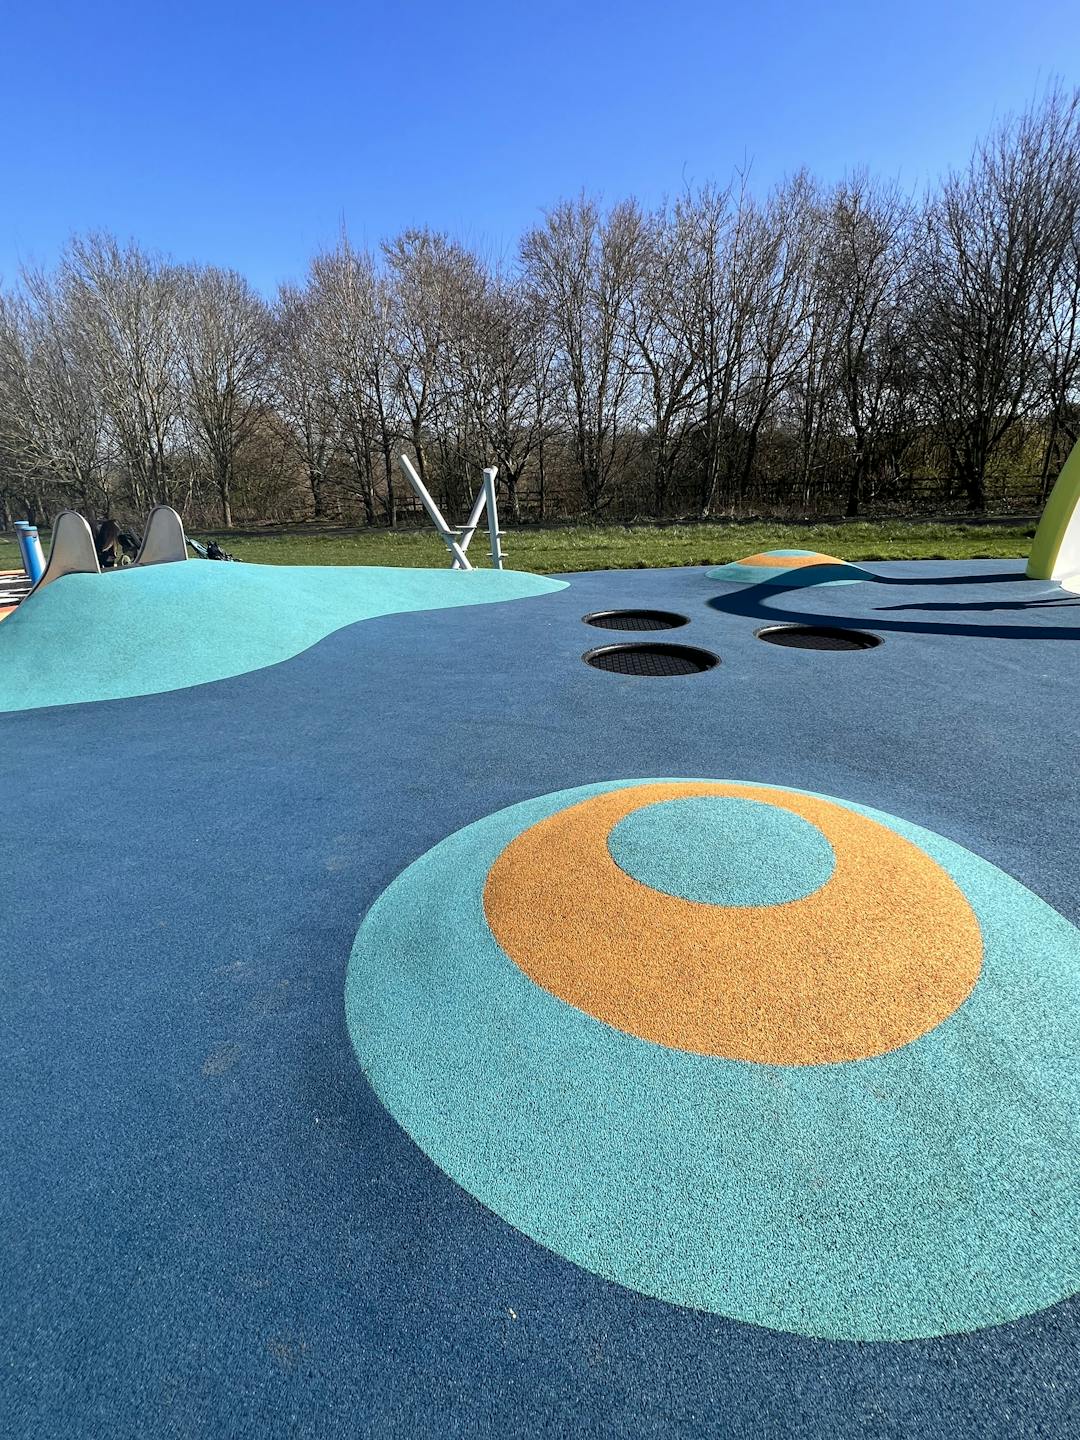 Cantley Park Playground - image 1